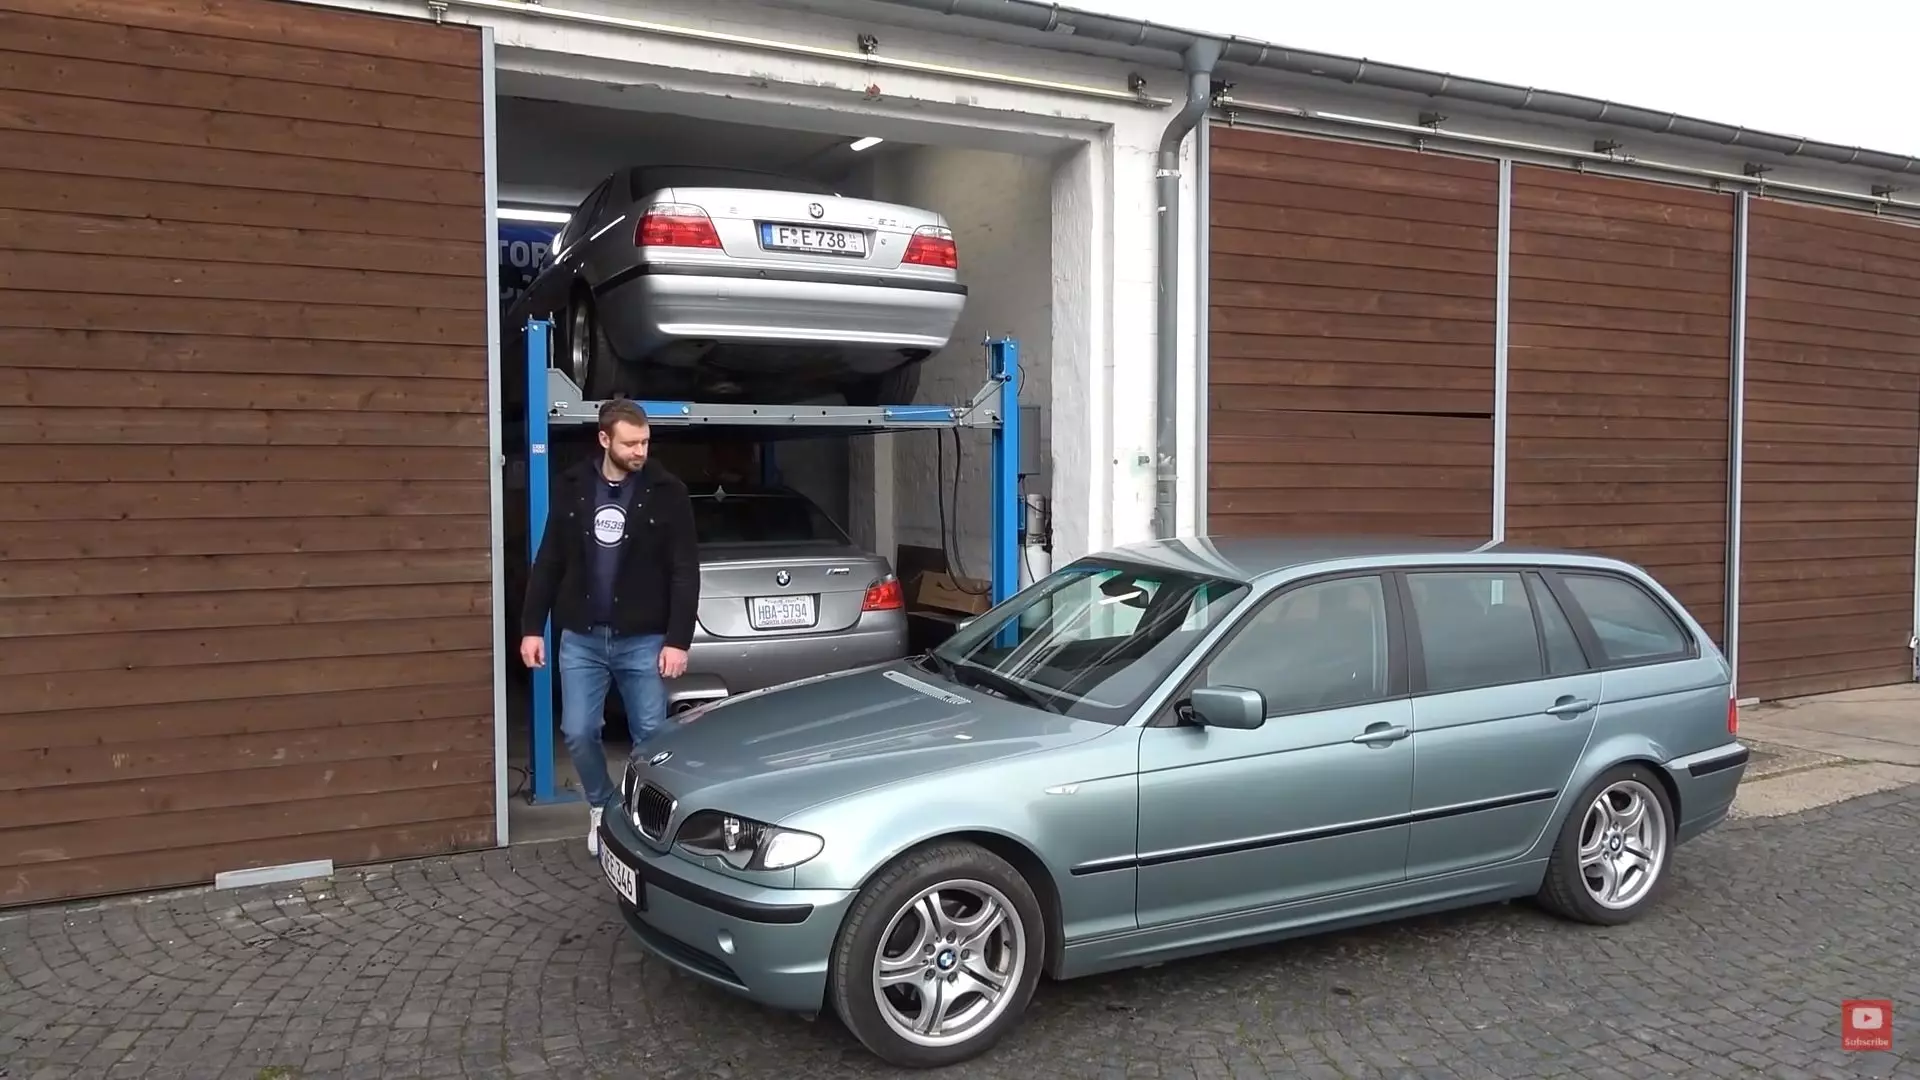 The M539 Restorations YouTube Channel Is Essential Viewing For &#8217;90s And 2000s BMW Fans